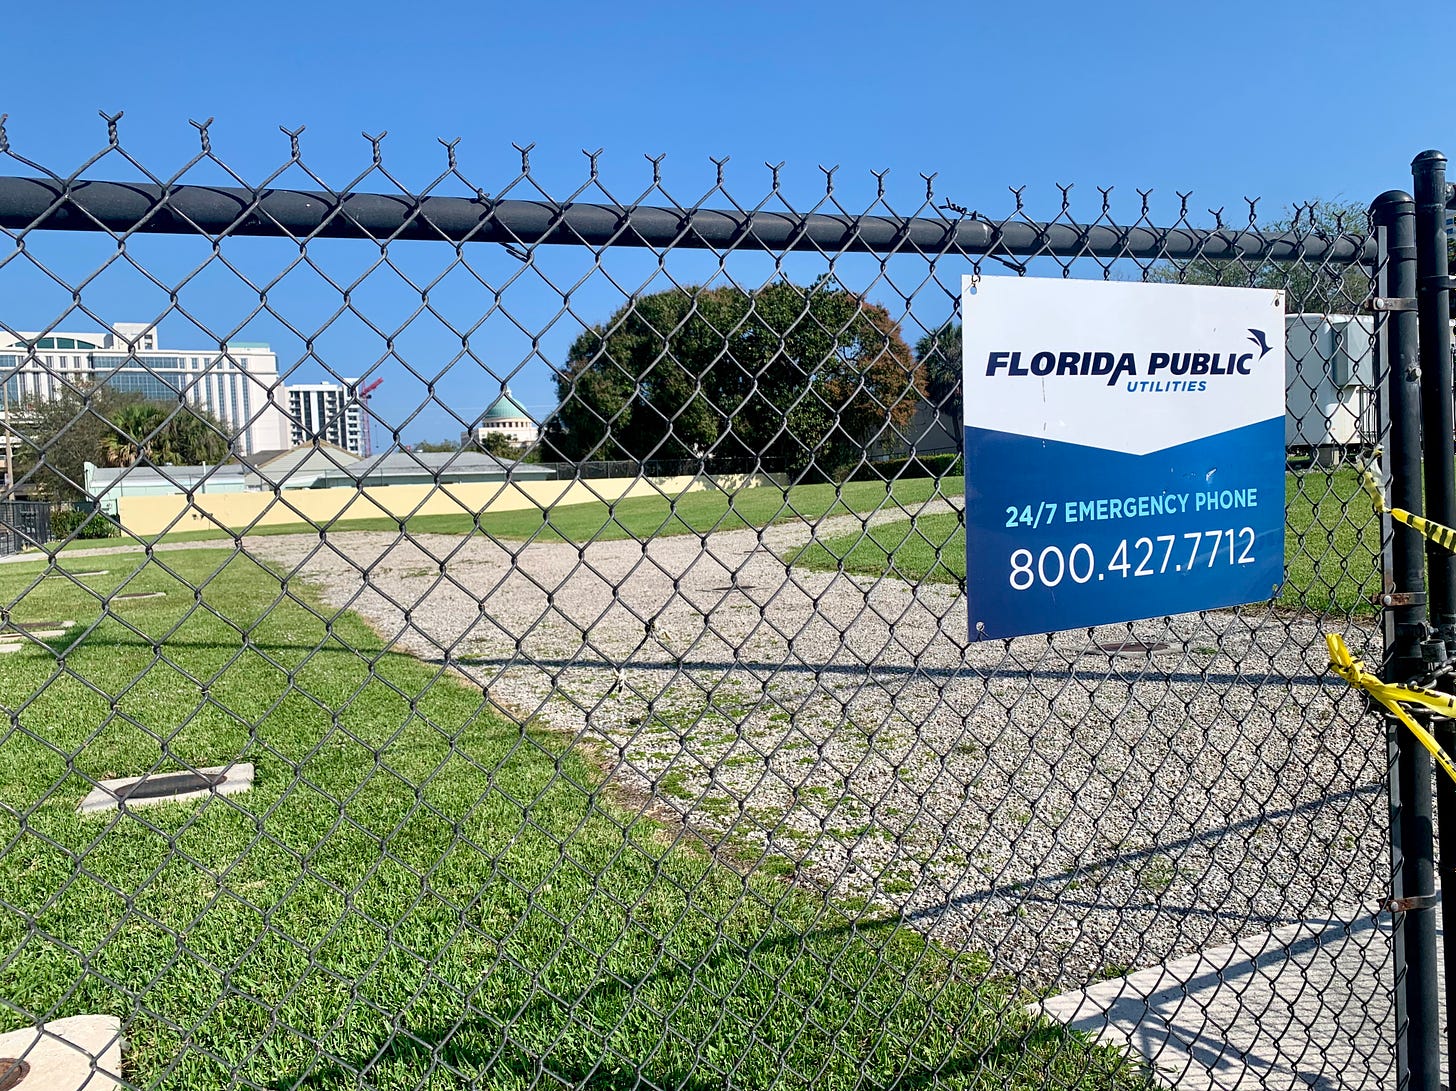 Fenced lot with West Palm Beach City Hall in the distant background.